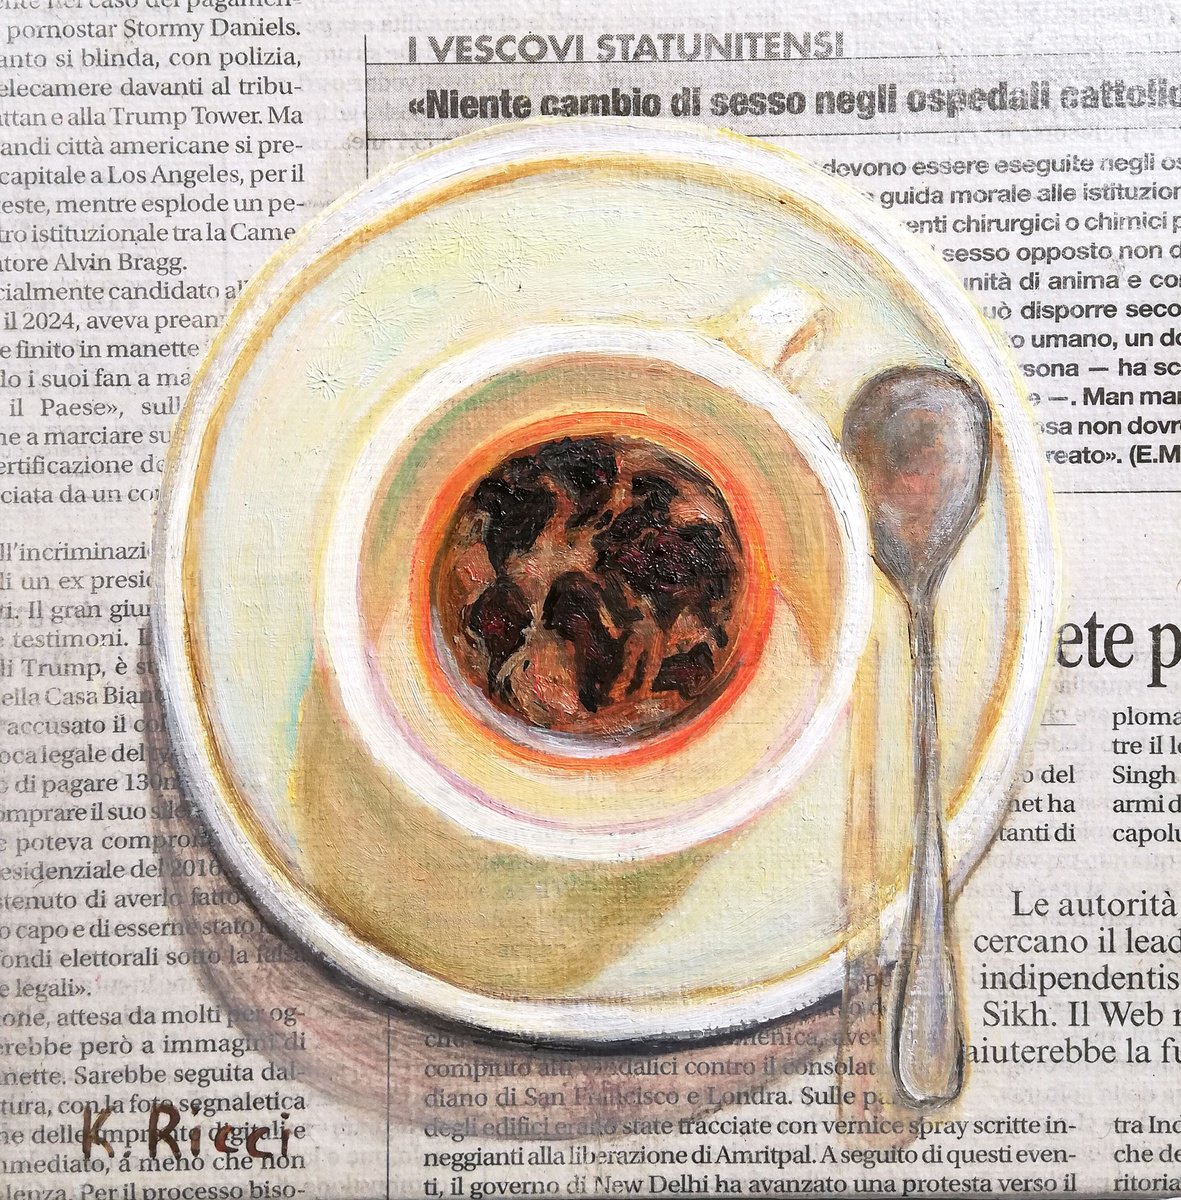 The Whole World in a Coffee Cup Original Oil on Newspaper and Canvas Board Painting 6 by... by Katia Ricci